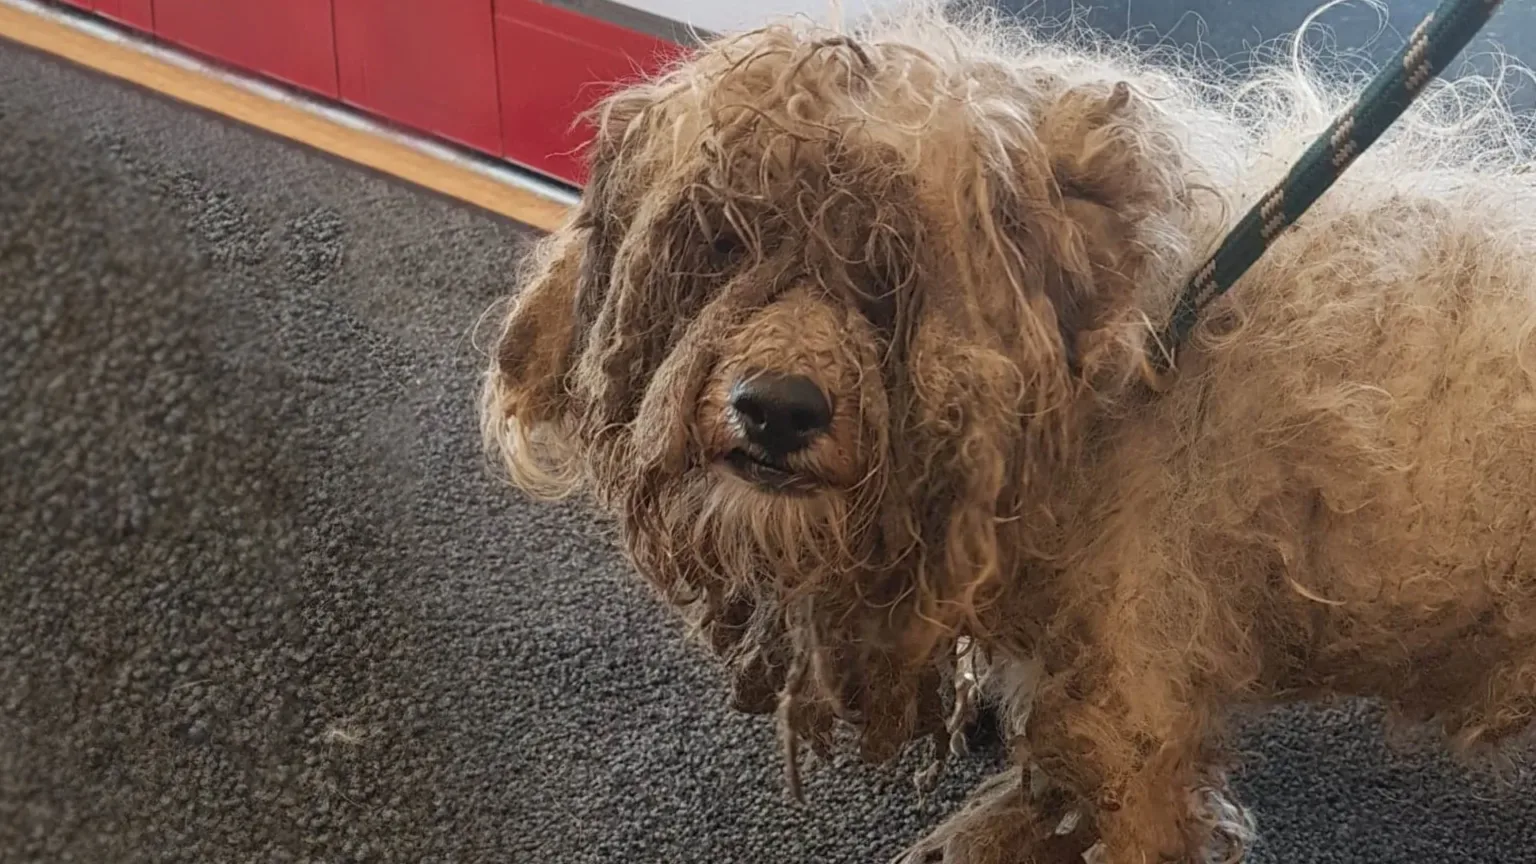 Winnie's fur was so badly matted that she could hardly walk